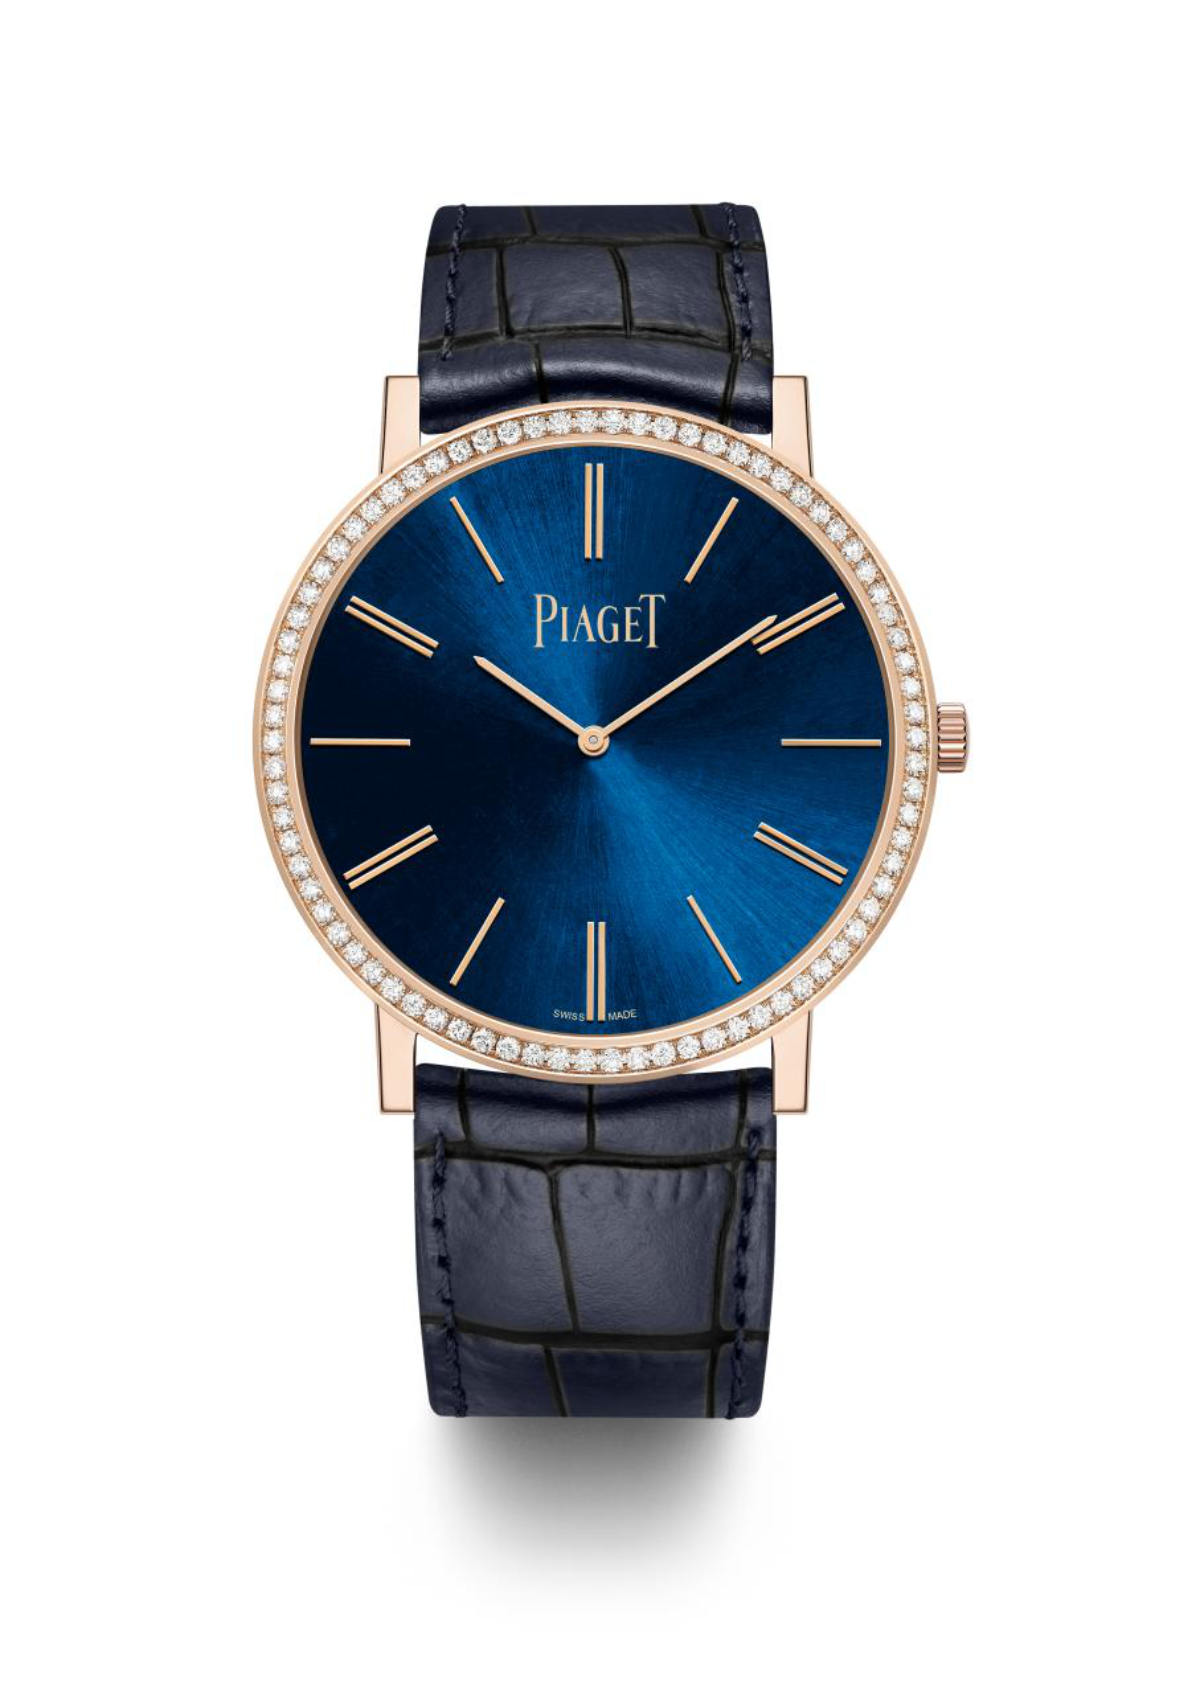 Piaget's Extraordinary Love On Valentine’s Day